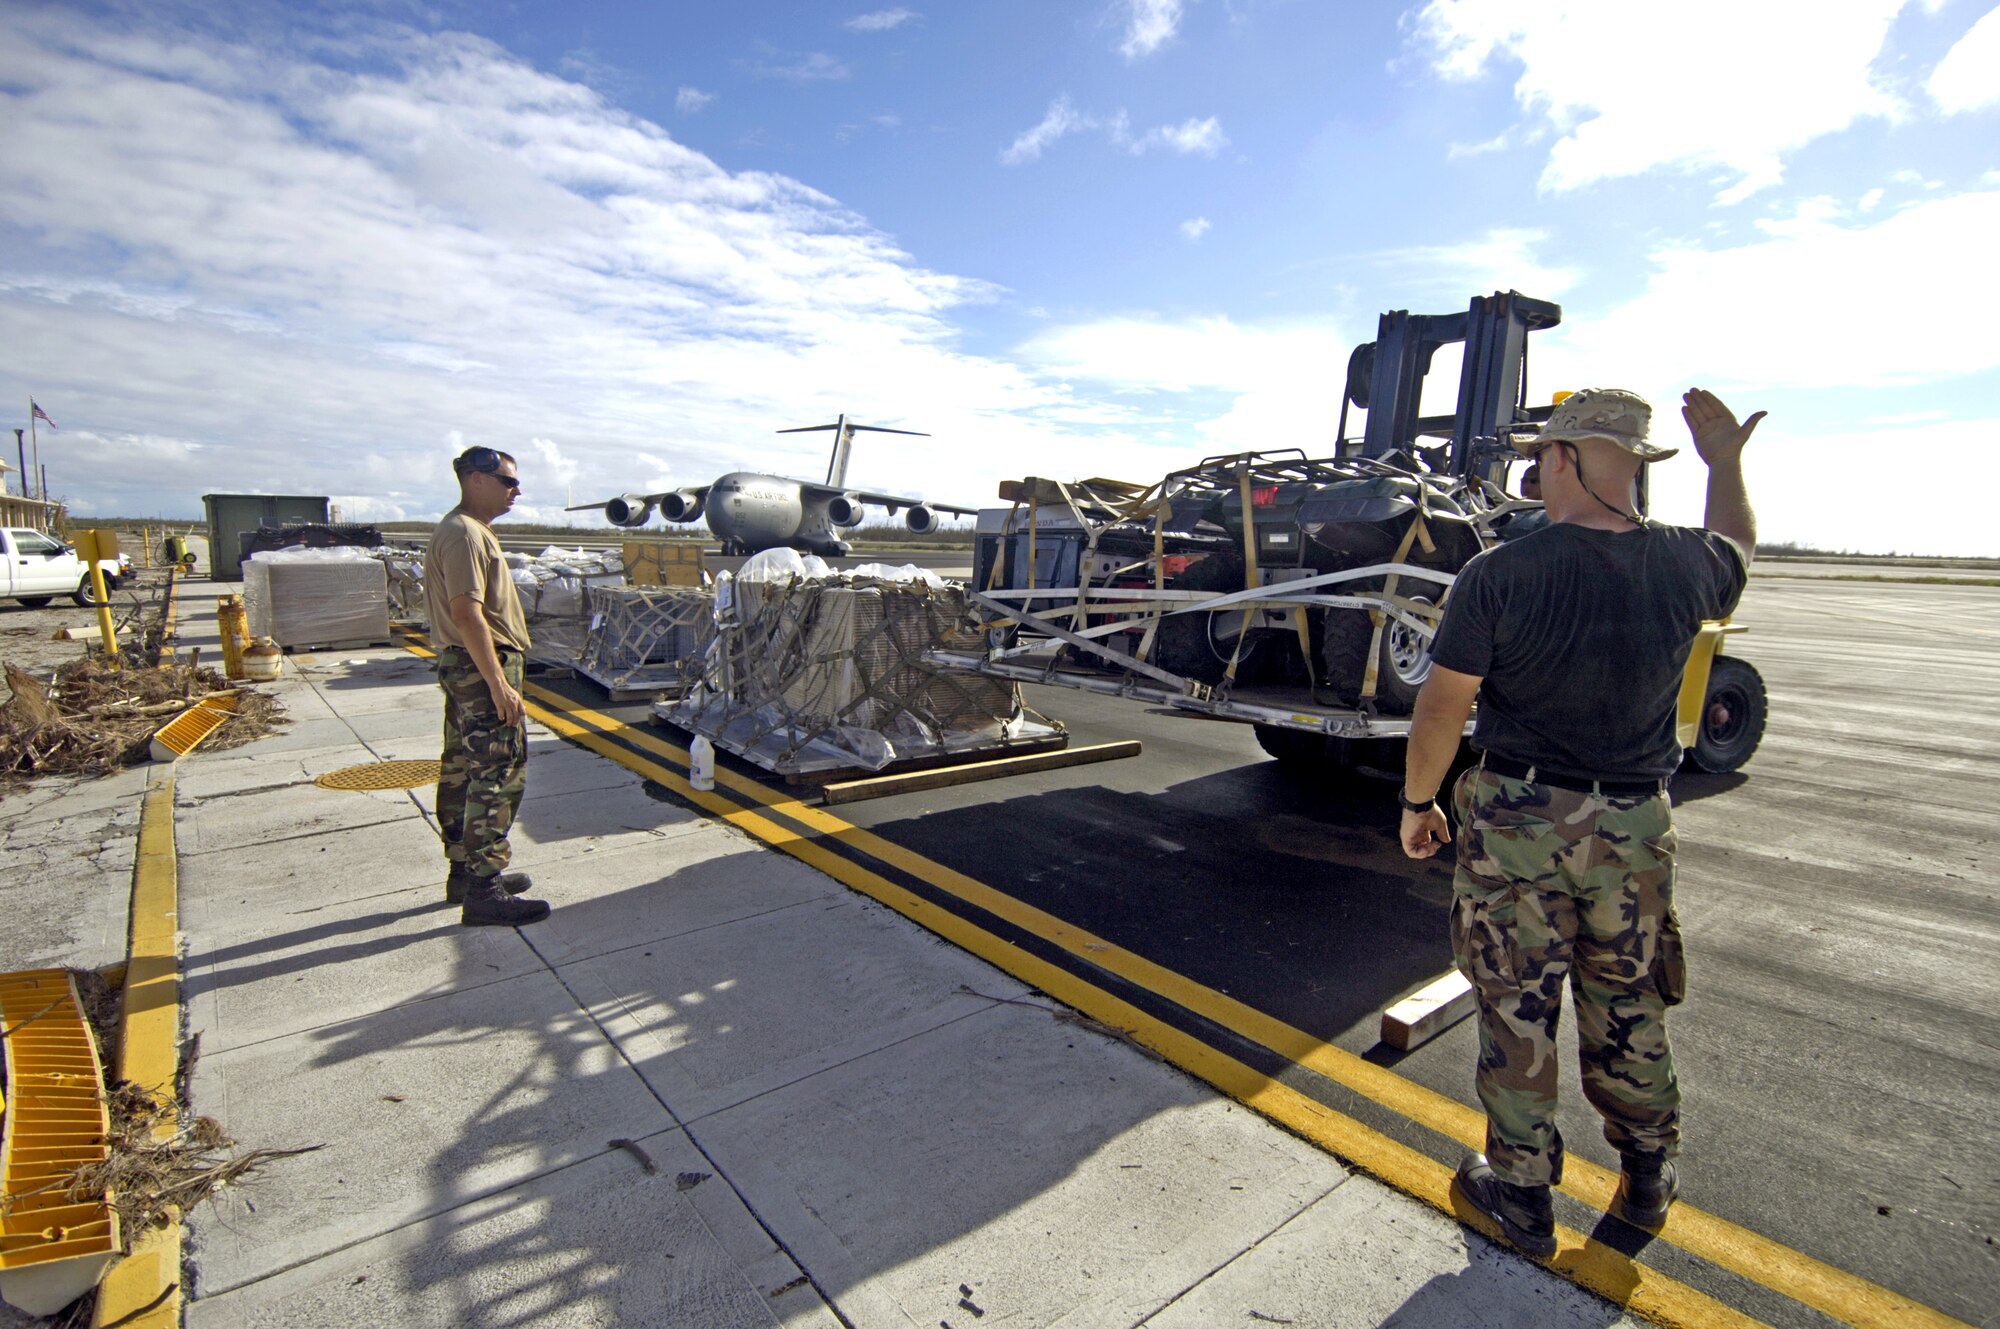 Tech. Sgt. Timothy Galunas and Staff Sgt. Ronald White line up pallets on the Wake Island flightline Sept. 12 offloaded from the C-17 Globemaster III in the background. The Airmen are from the 36th Contingency Response Group at Andersen Air Force Base, Guam. They are assisting a 53-person team assessing damage left by Super Typhoon Ioke after it hit the island Aug. 31. (U.S. Air Force photo/Tech. Sgt. Shane A. Cuomo) 